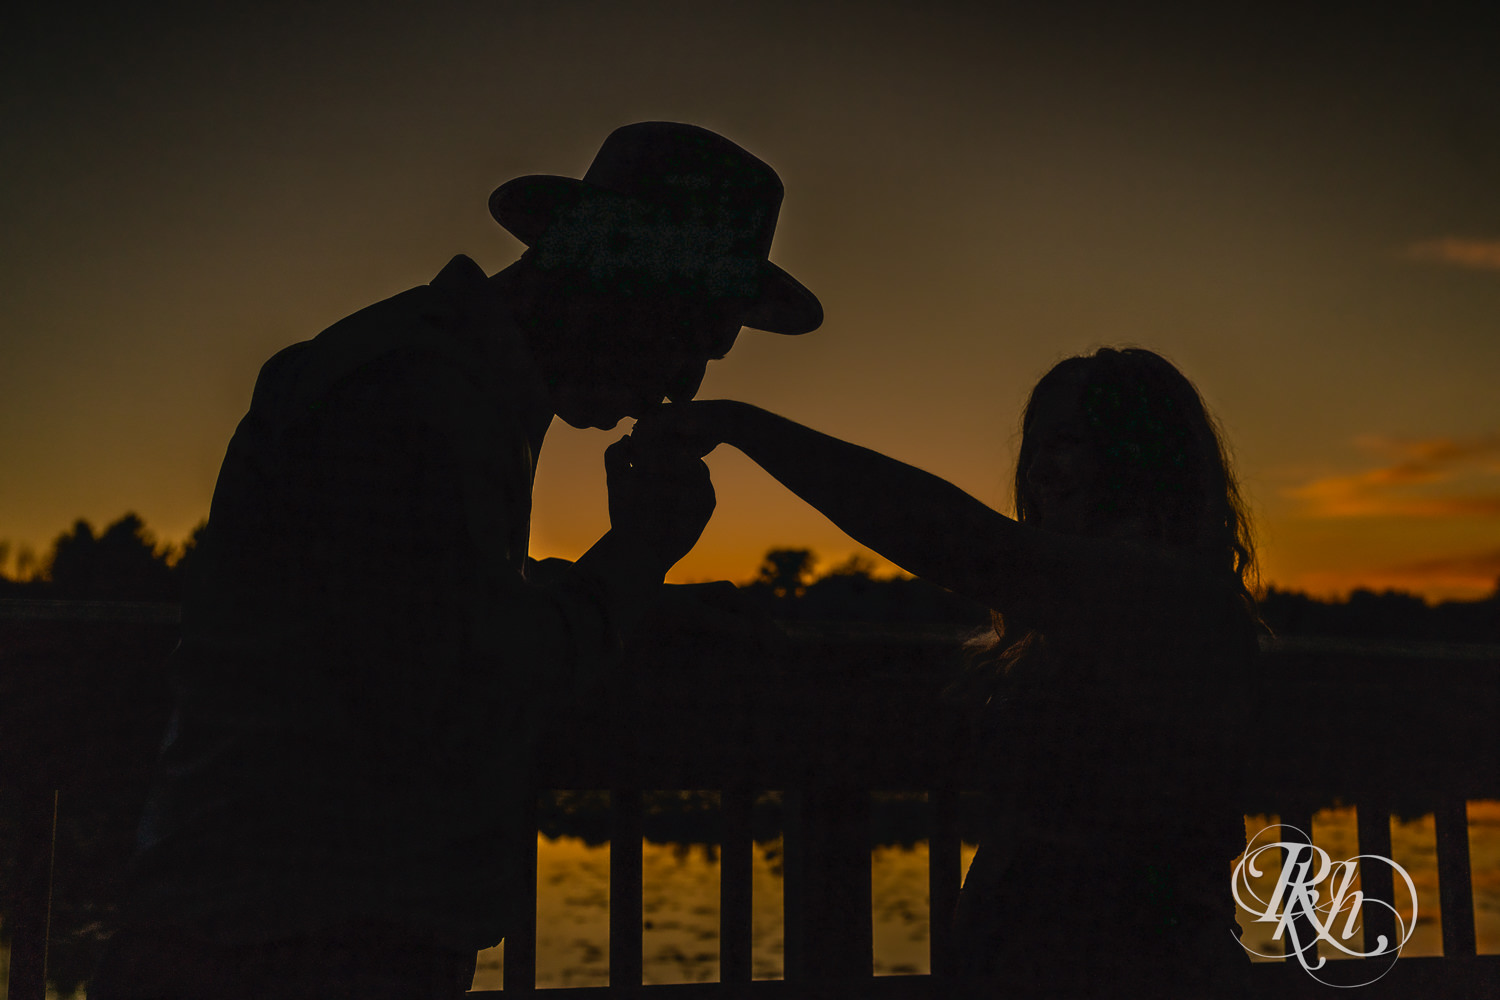 Man in hat and jeans and woman in dress kiss in silhouette at Lebanon Hills Regional Park in Eagan, Minnesota.